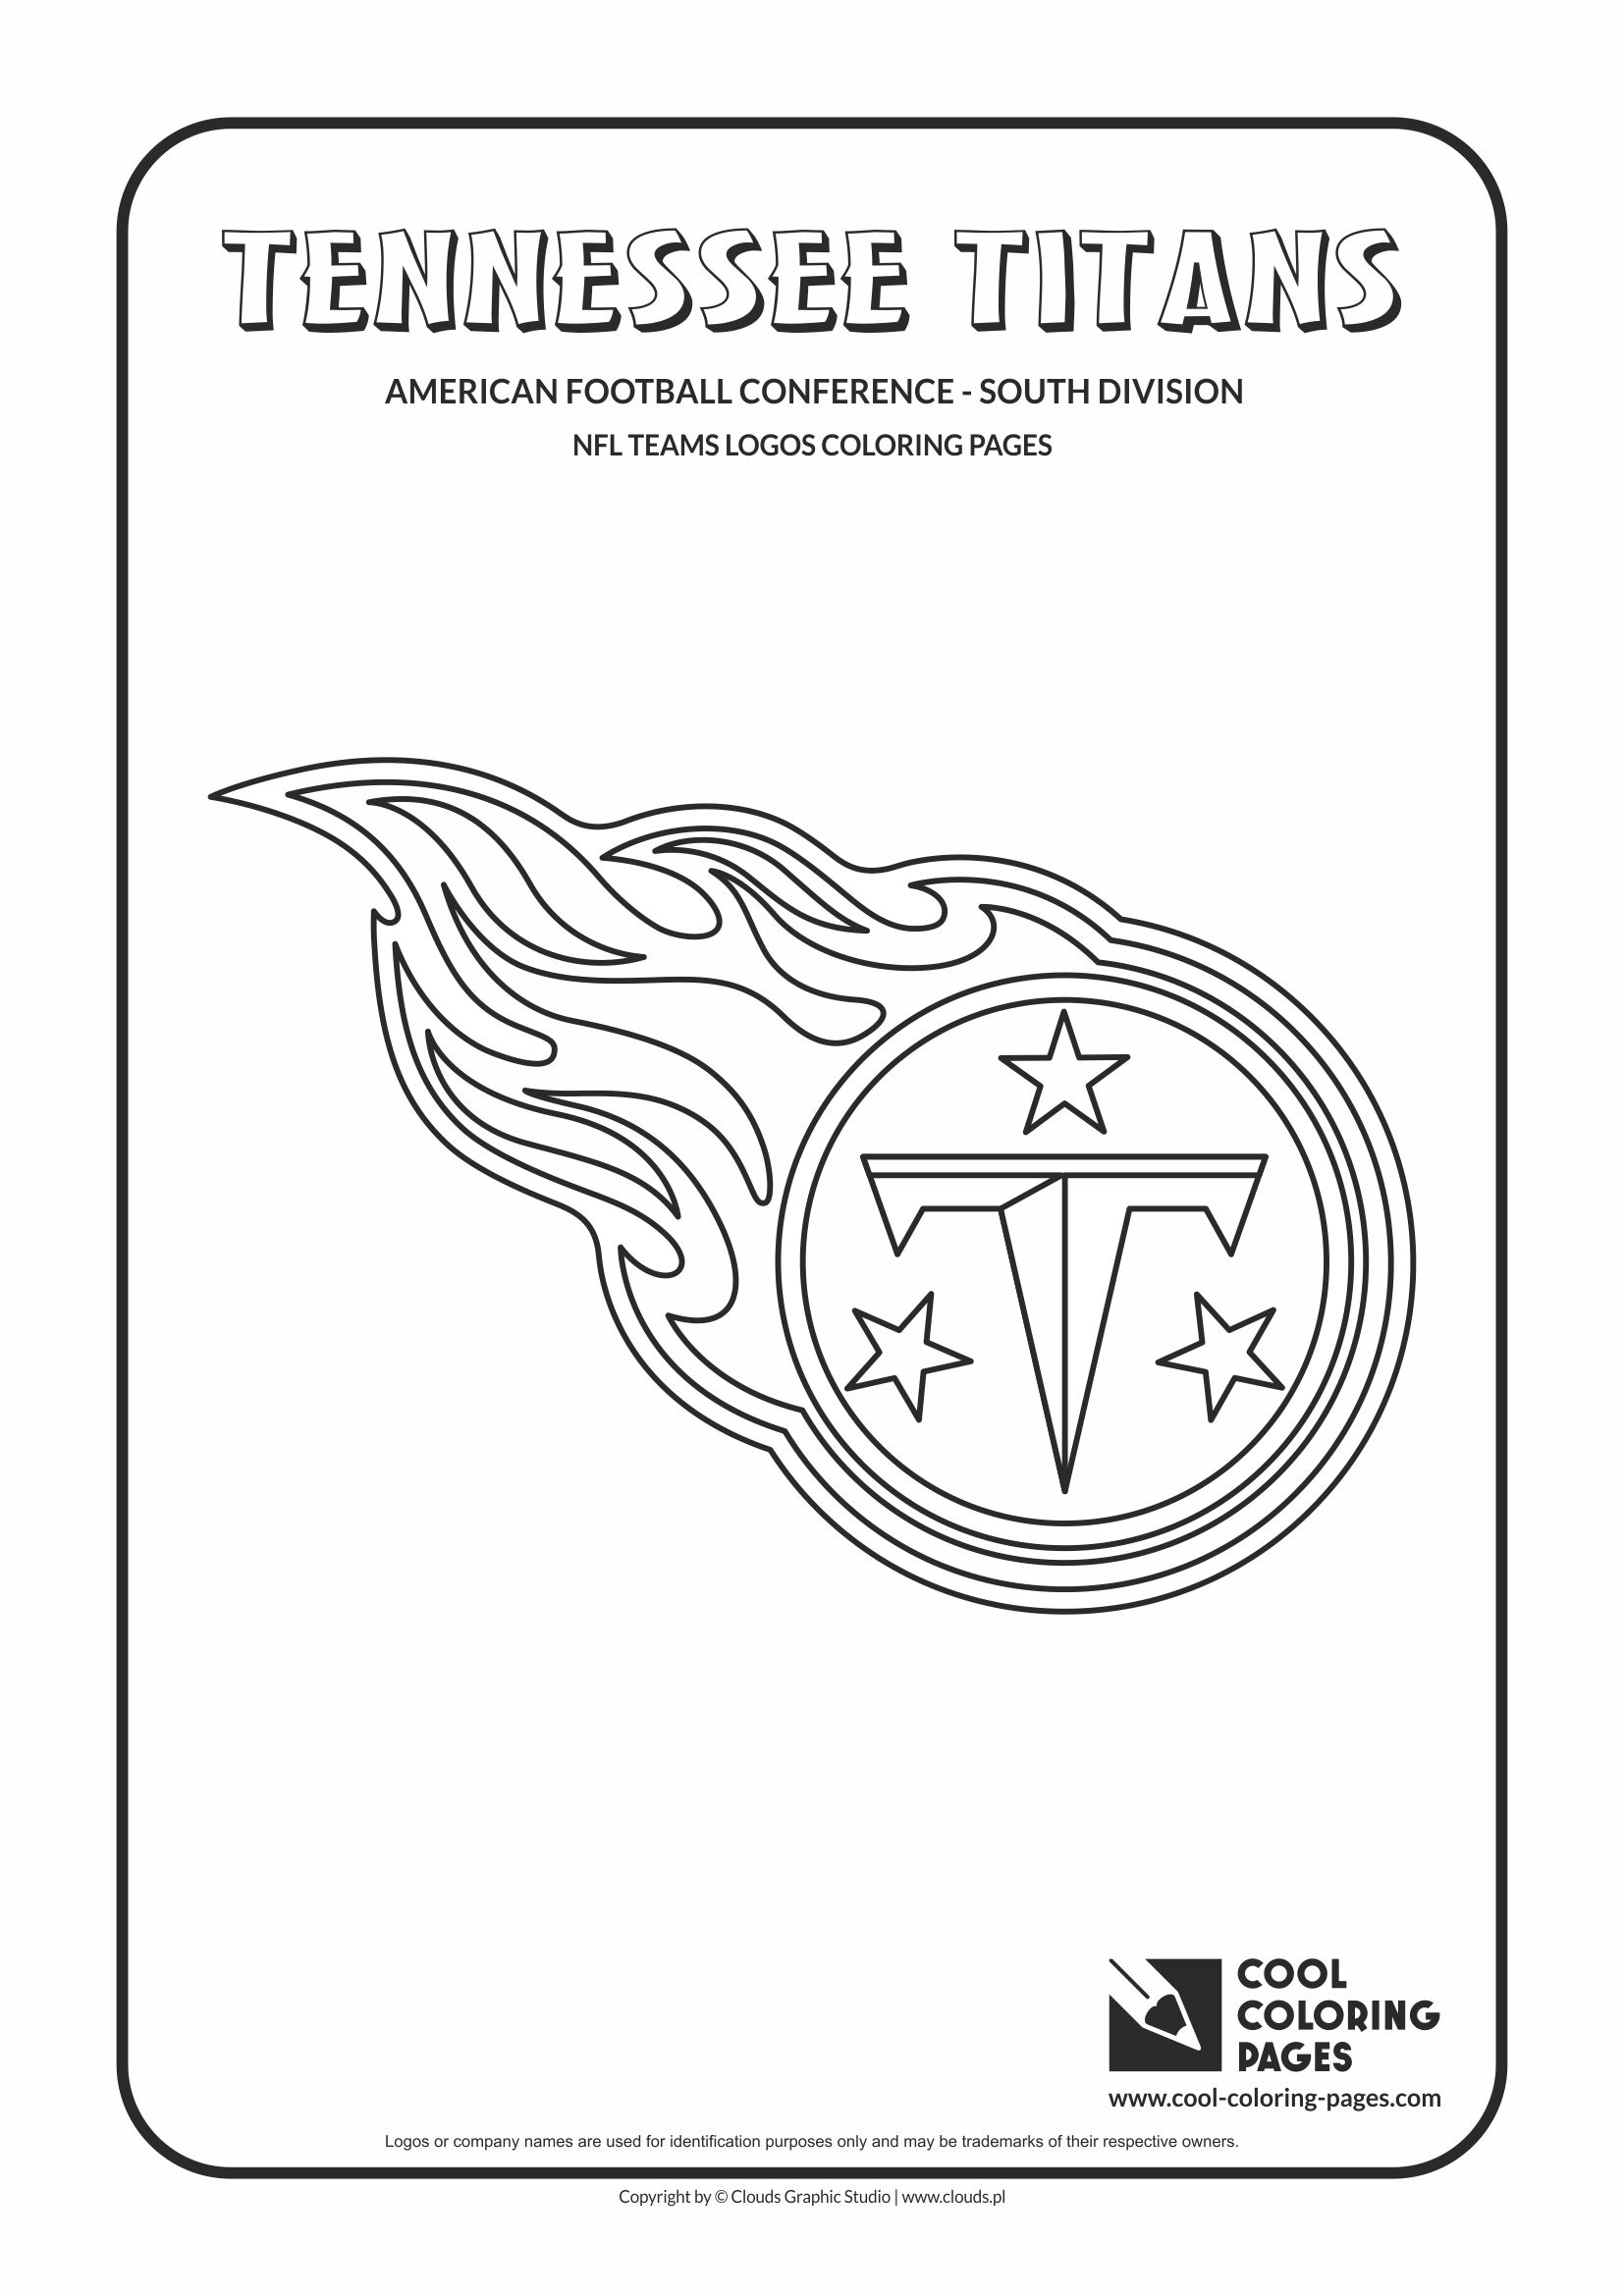 Cool Coloring Pages - NFL American Football Clubs Logos - American Football Conference - South Division / Tennessee Titans logo / Coloring page with Tennessee Titans logo